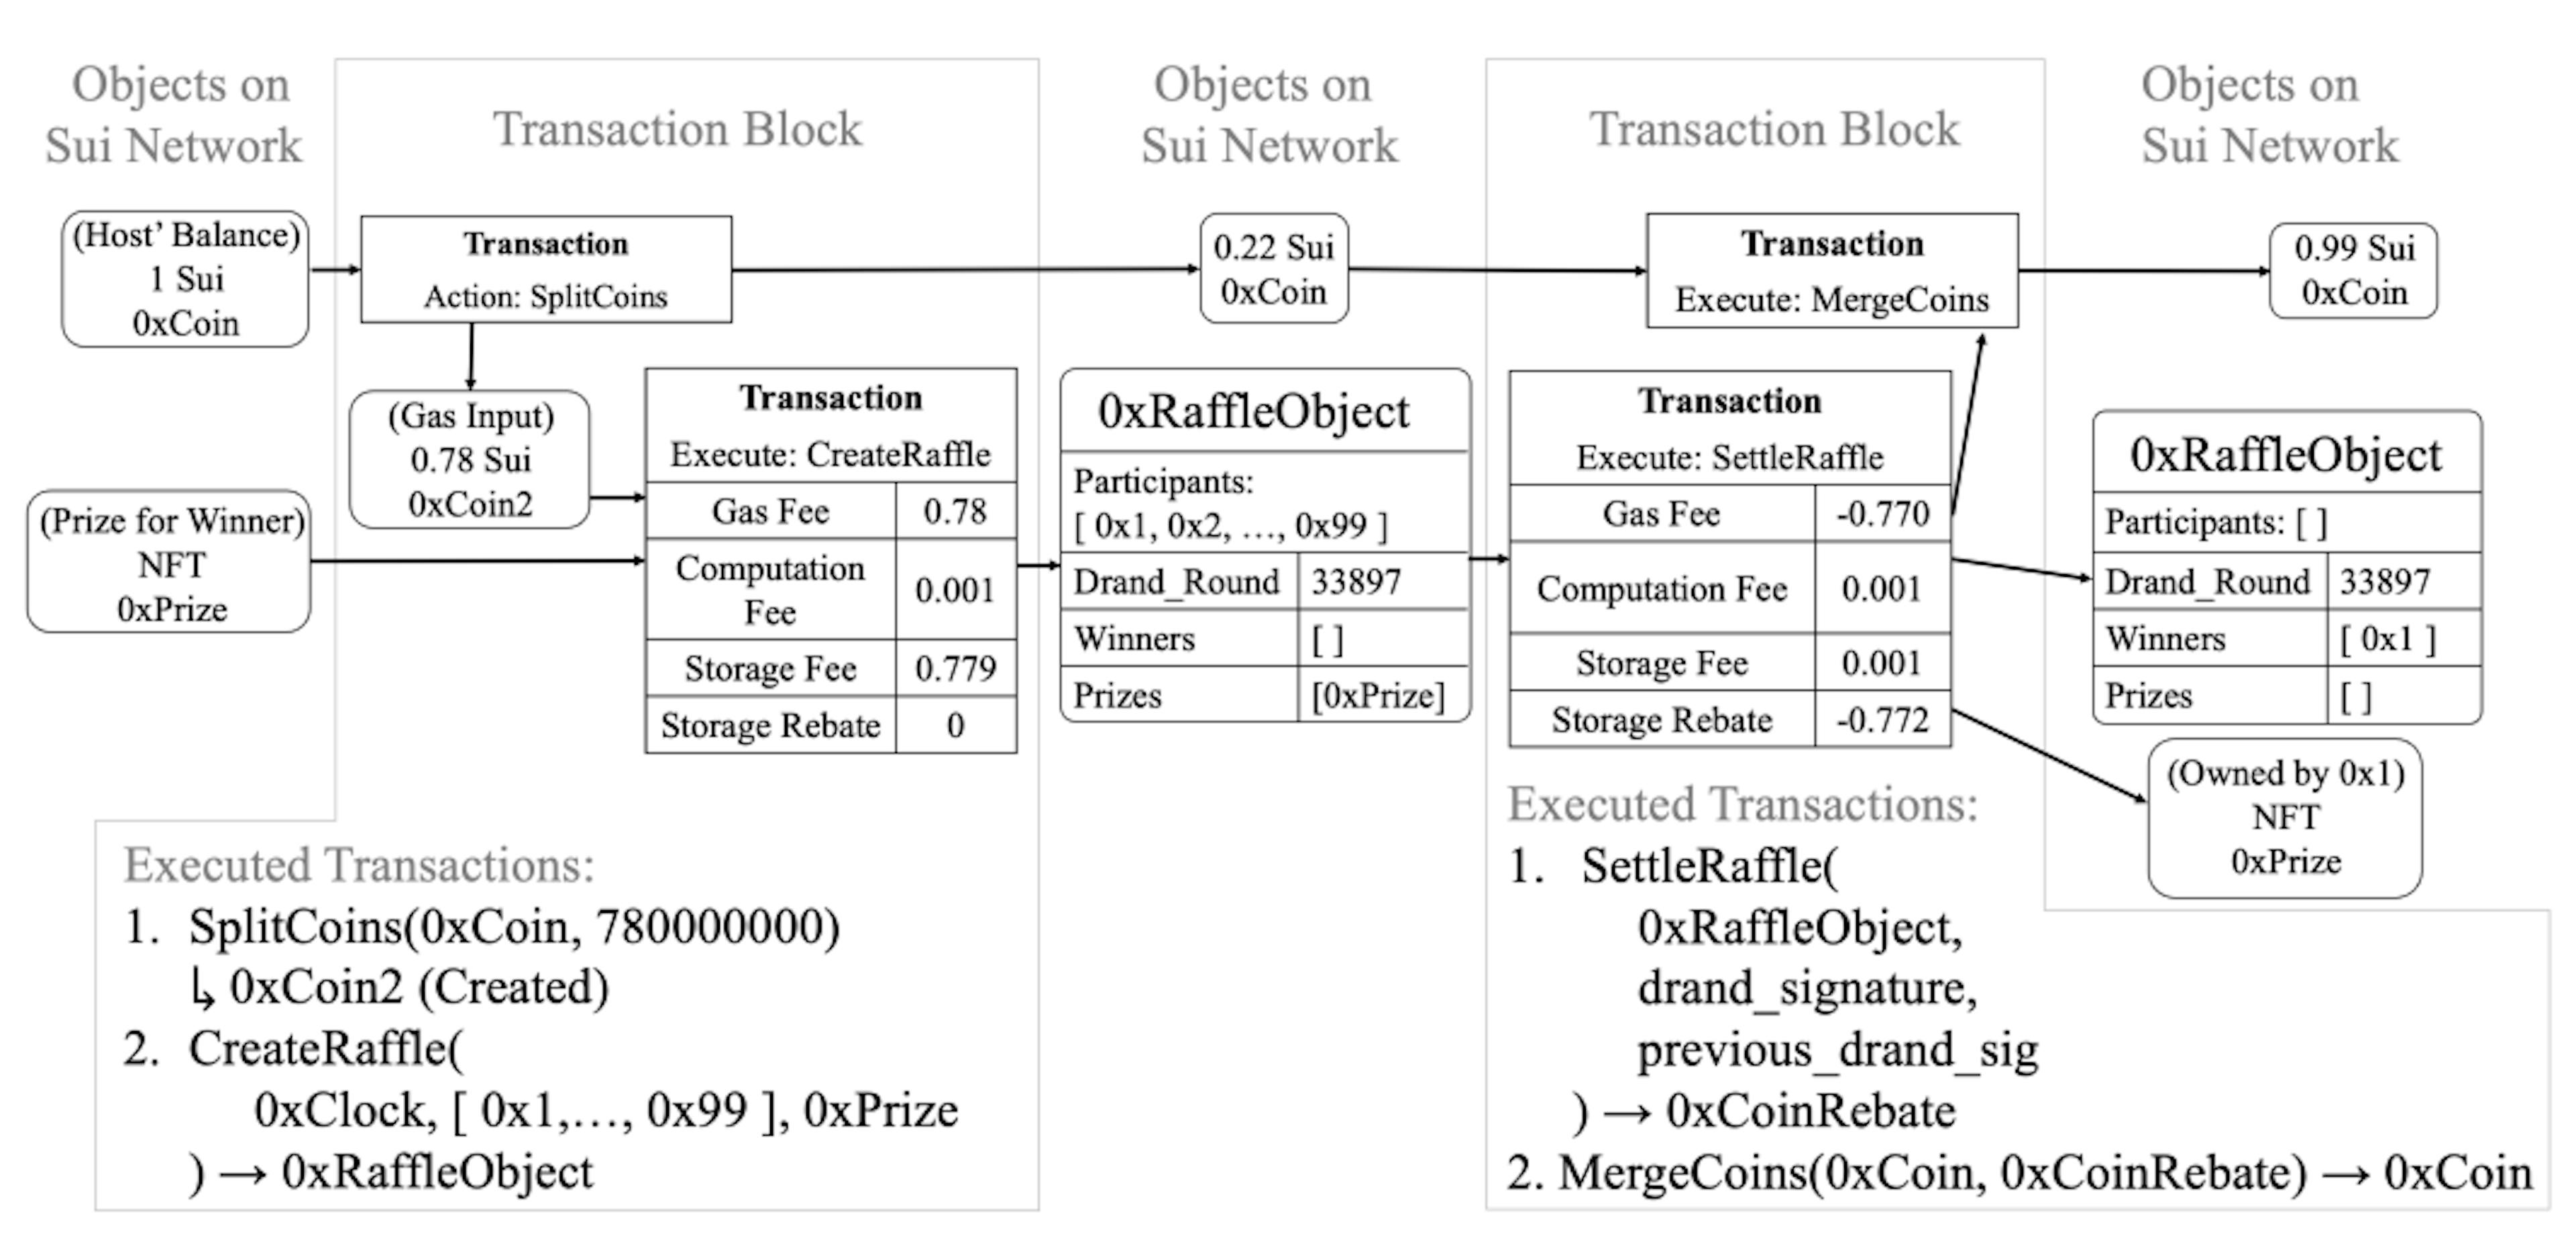 Figure 1: Example of how Basic Raffle executed on the Sui Network. The first transaction block executed transactions to initiate the basic raffle via a DRAND round, while the second block settled the raffle with DRAND beacons and sent prizes to winners.